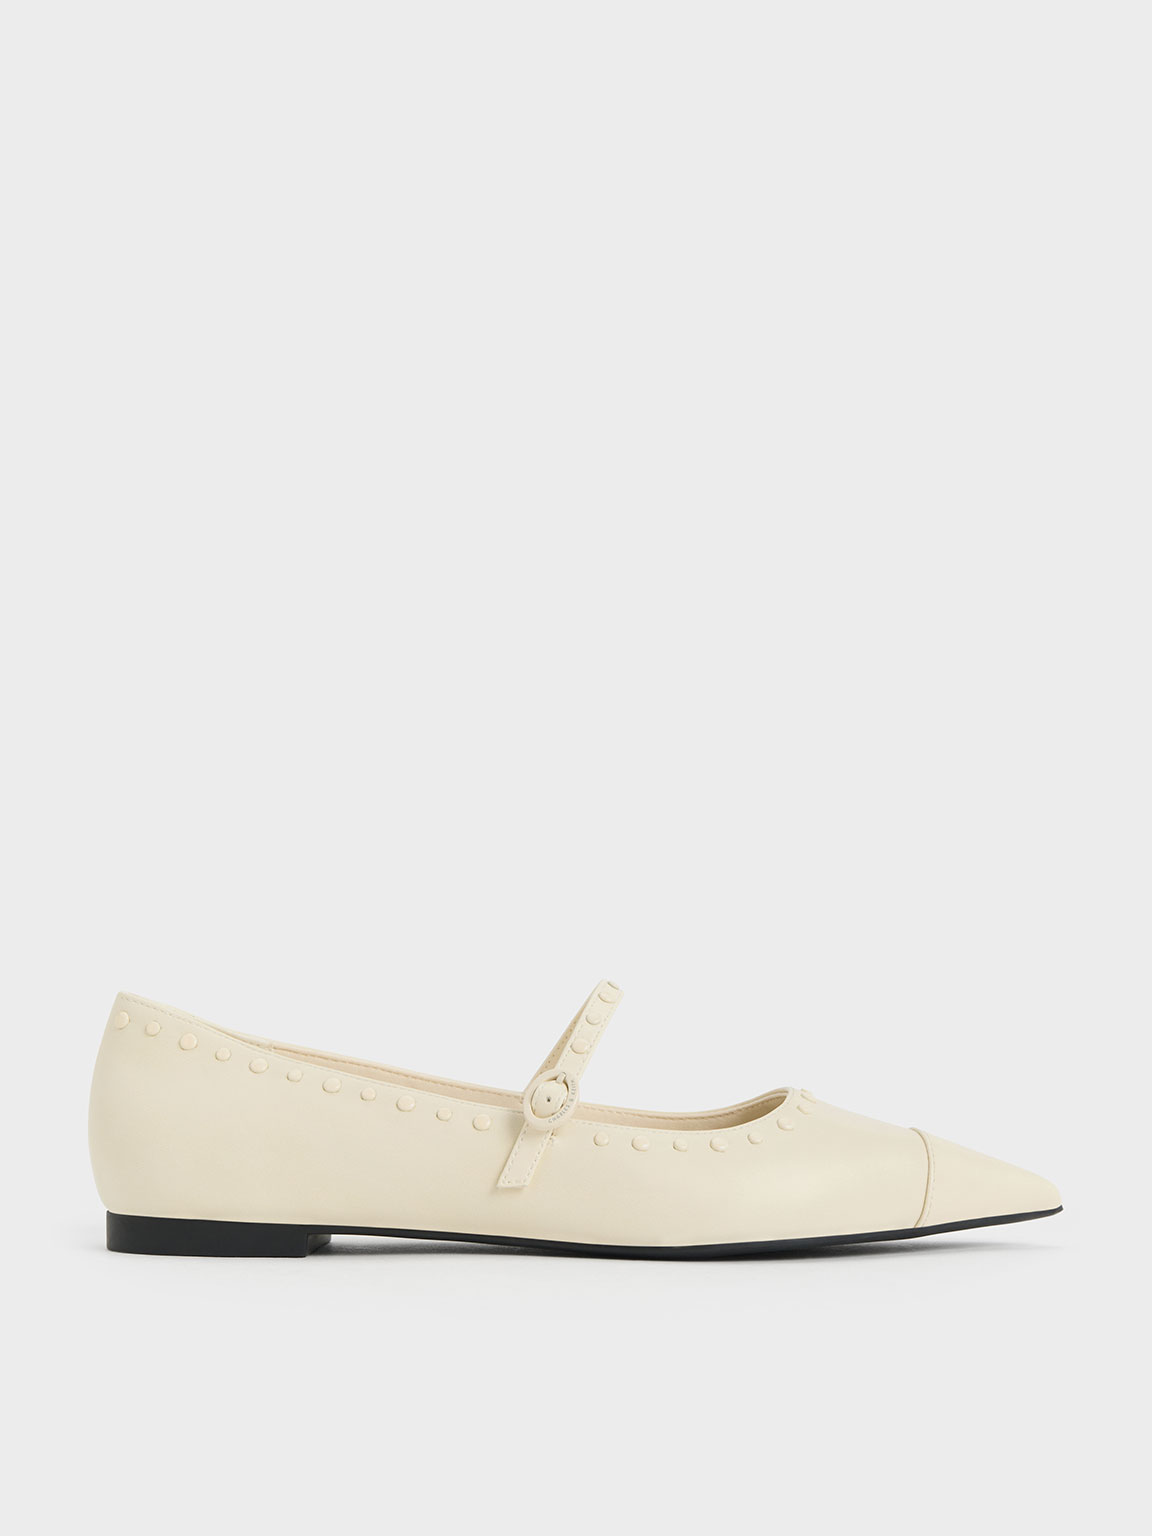 Chalk Studded Pointed-Toe Mary Jane Flats - CHARLES & KEITH SG